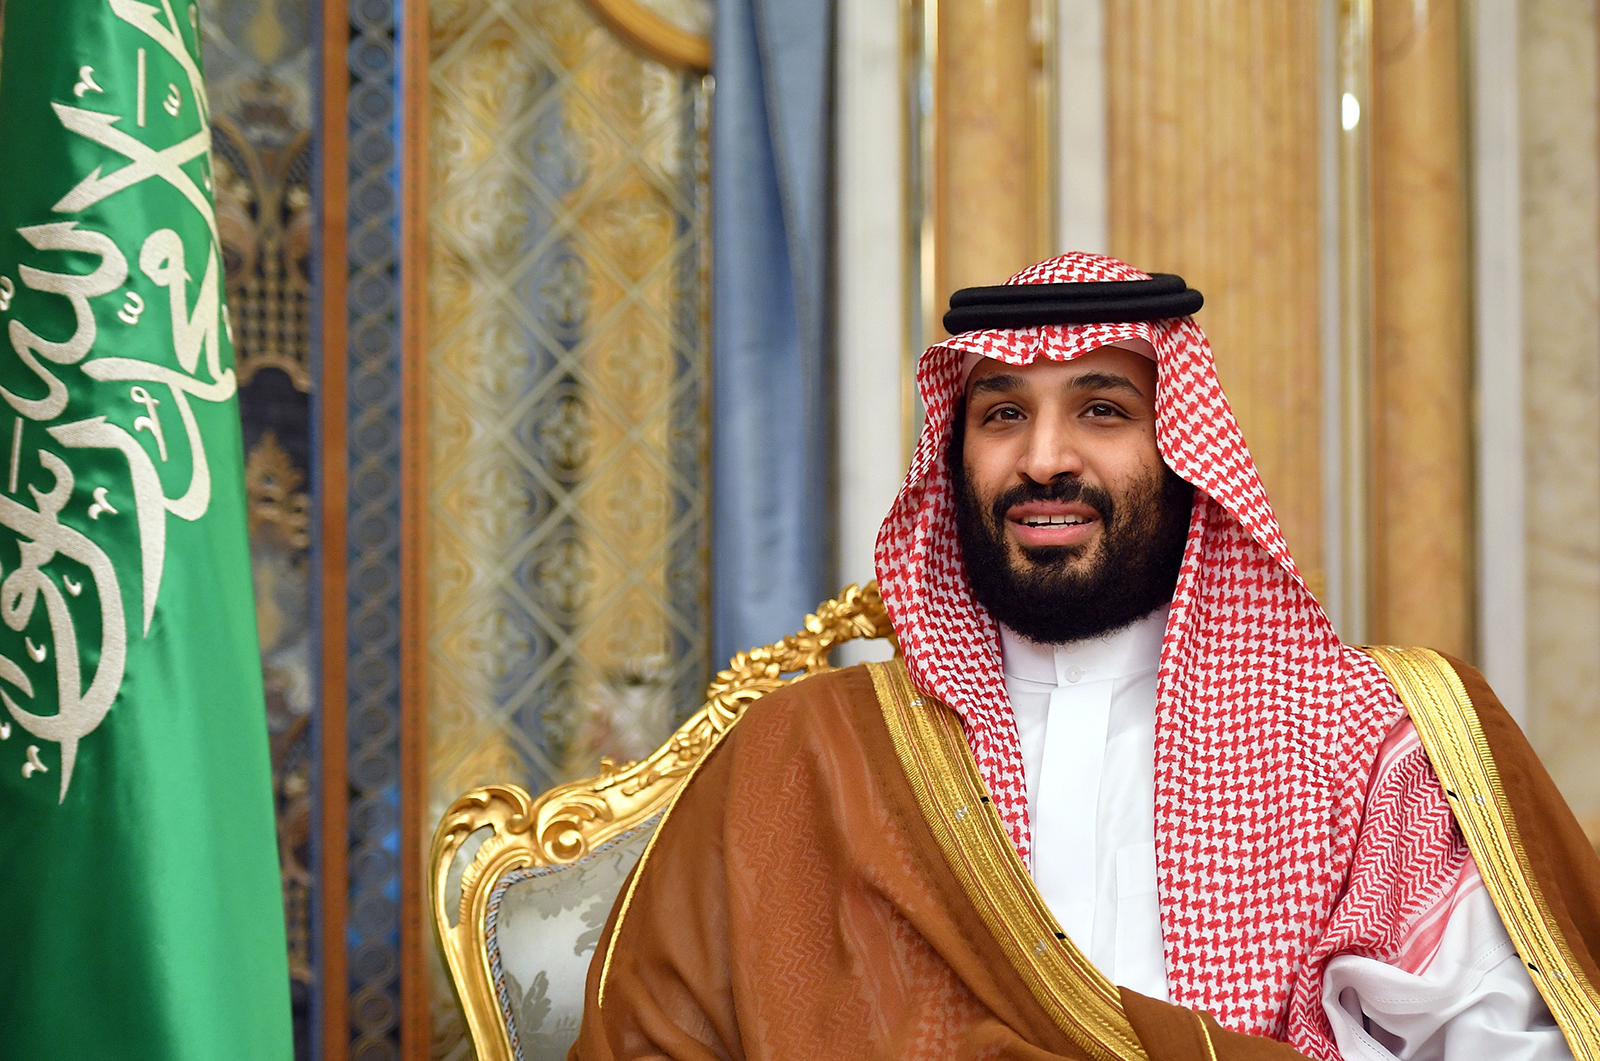 Saudi Arabia's Crown Prince Mohammed bin Salman attends a meeting with the US secretary of state in Jeddah, Saudi Arabia, on September 18, 2019.